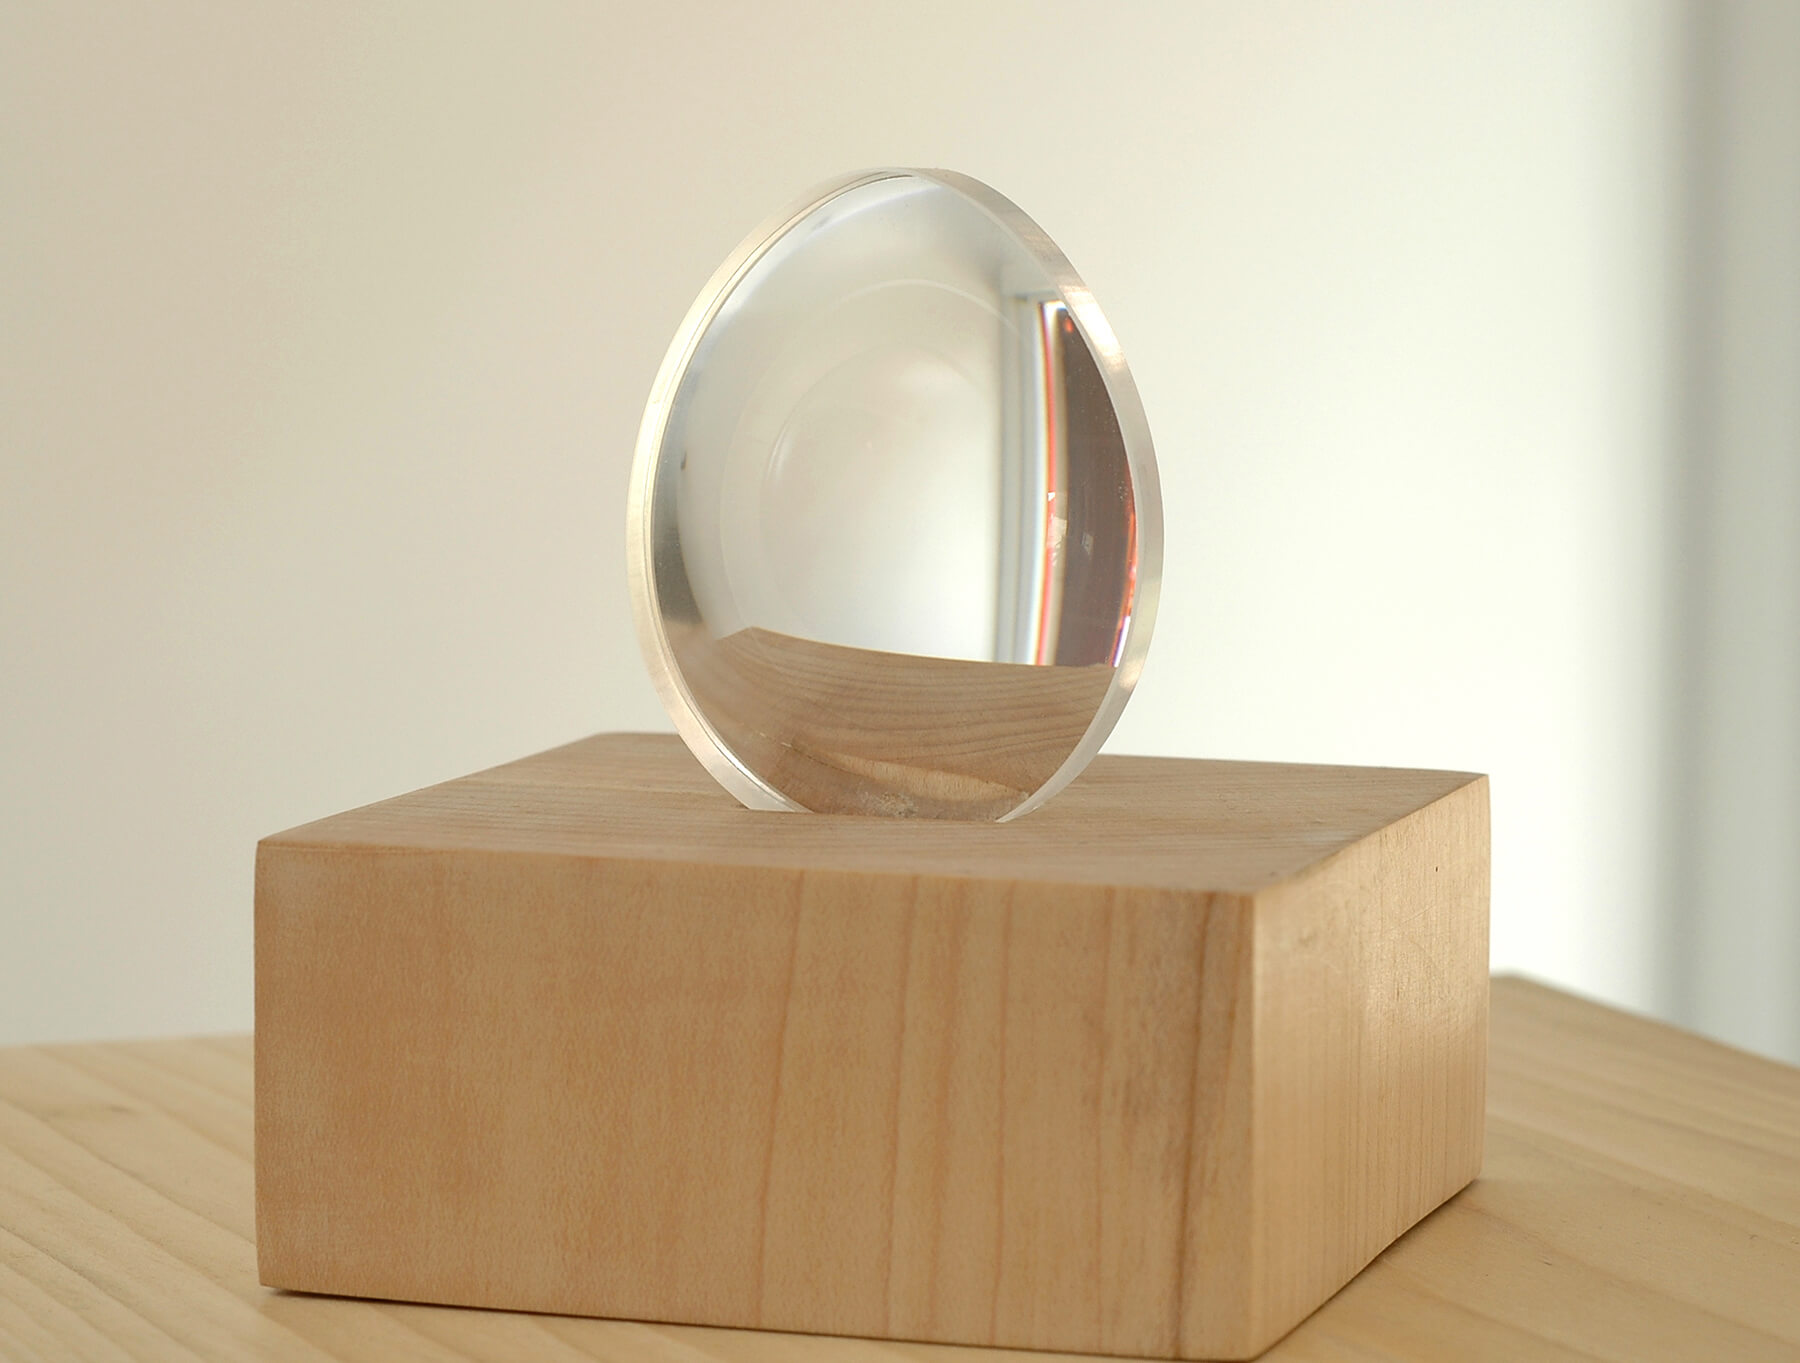 Chicken, Optical lens with Rojany's prescription, 2 x 2 ½ x ½ in, 2005